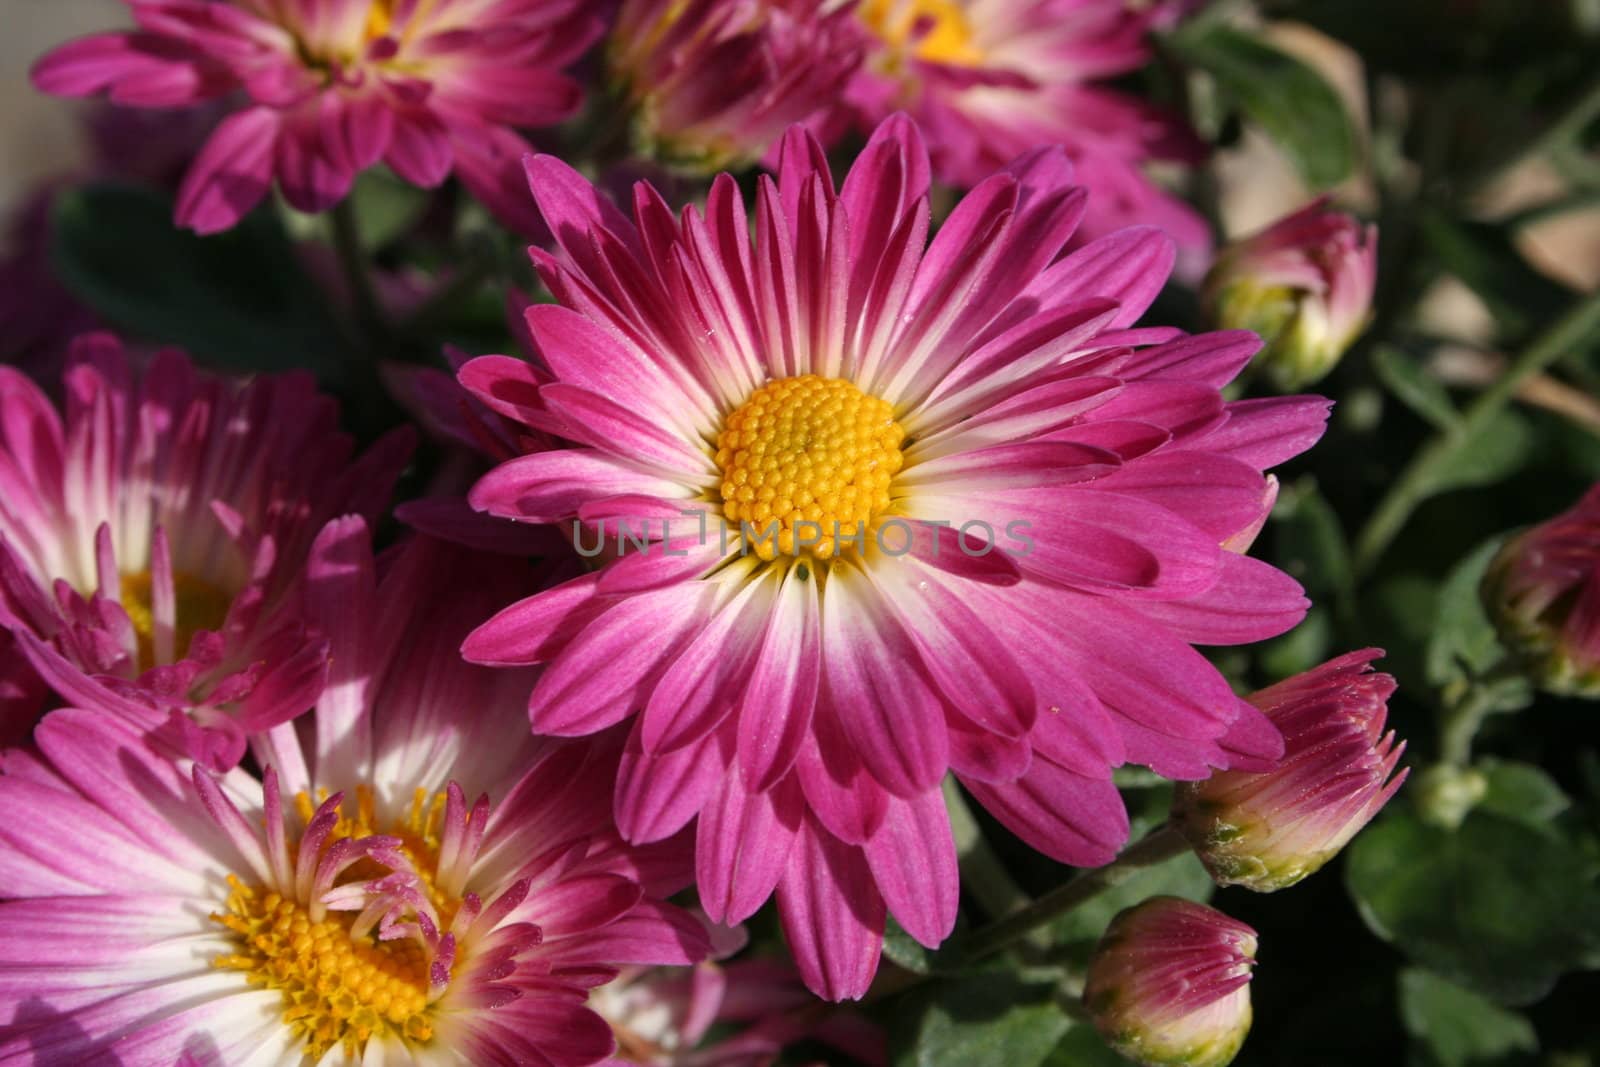 Purple flower with yellow center, surrounded by other purple flowers